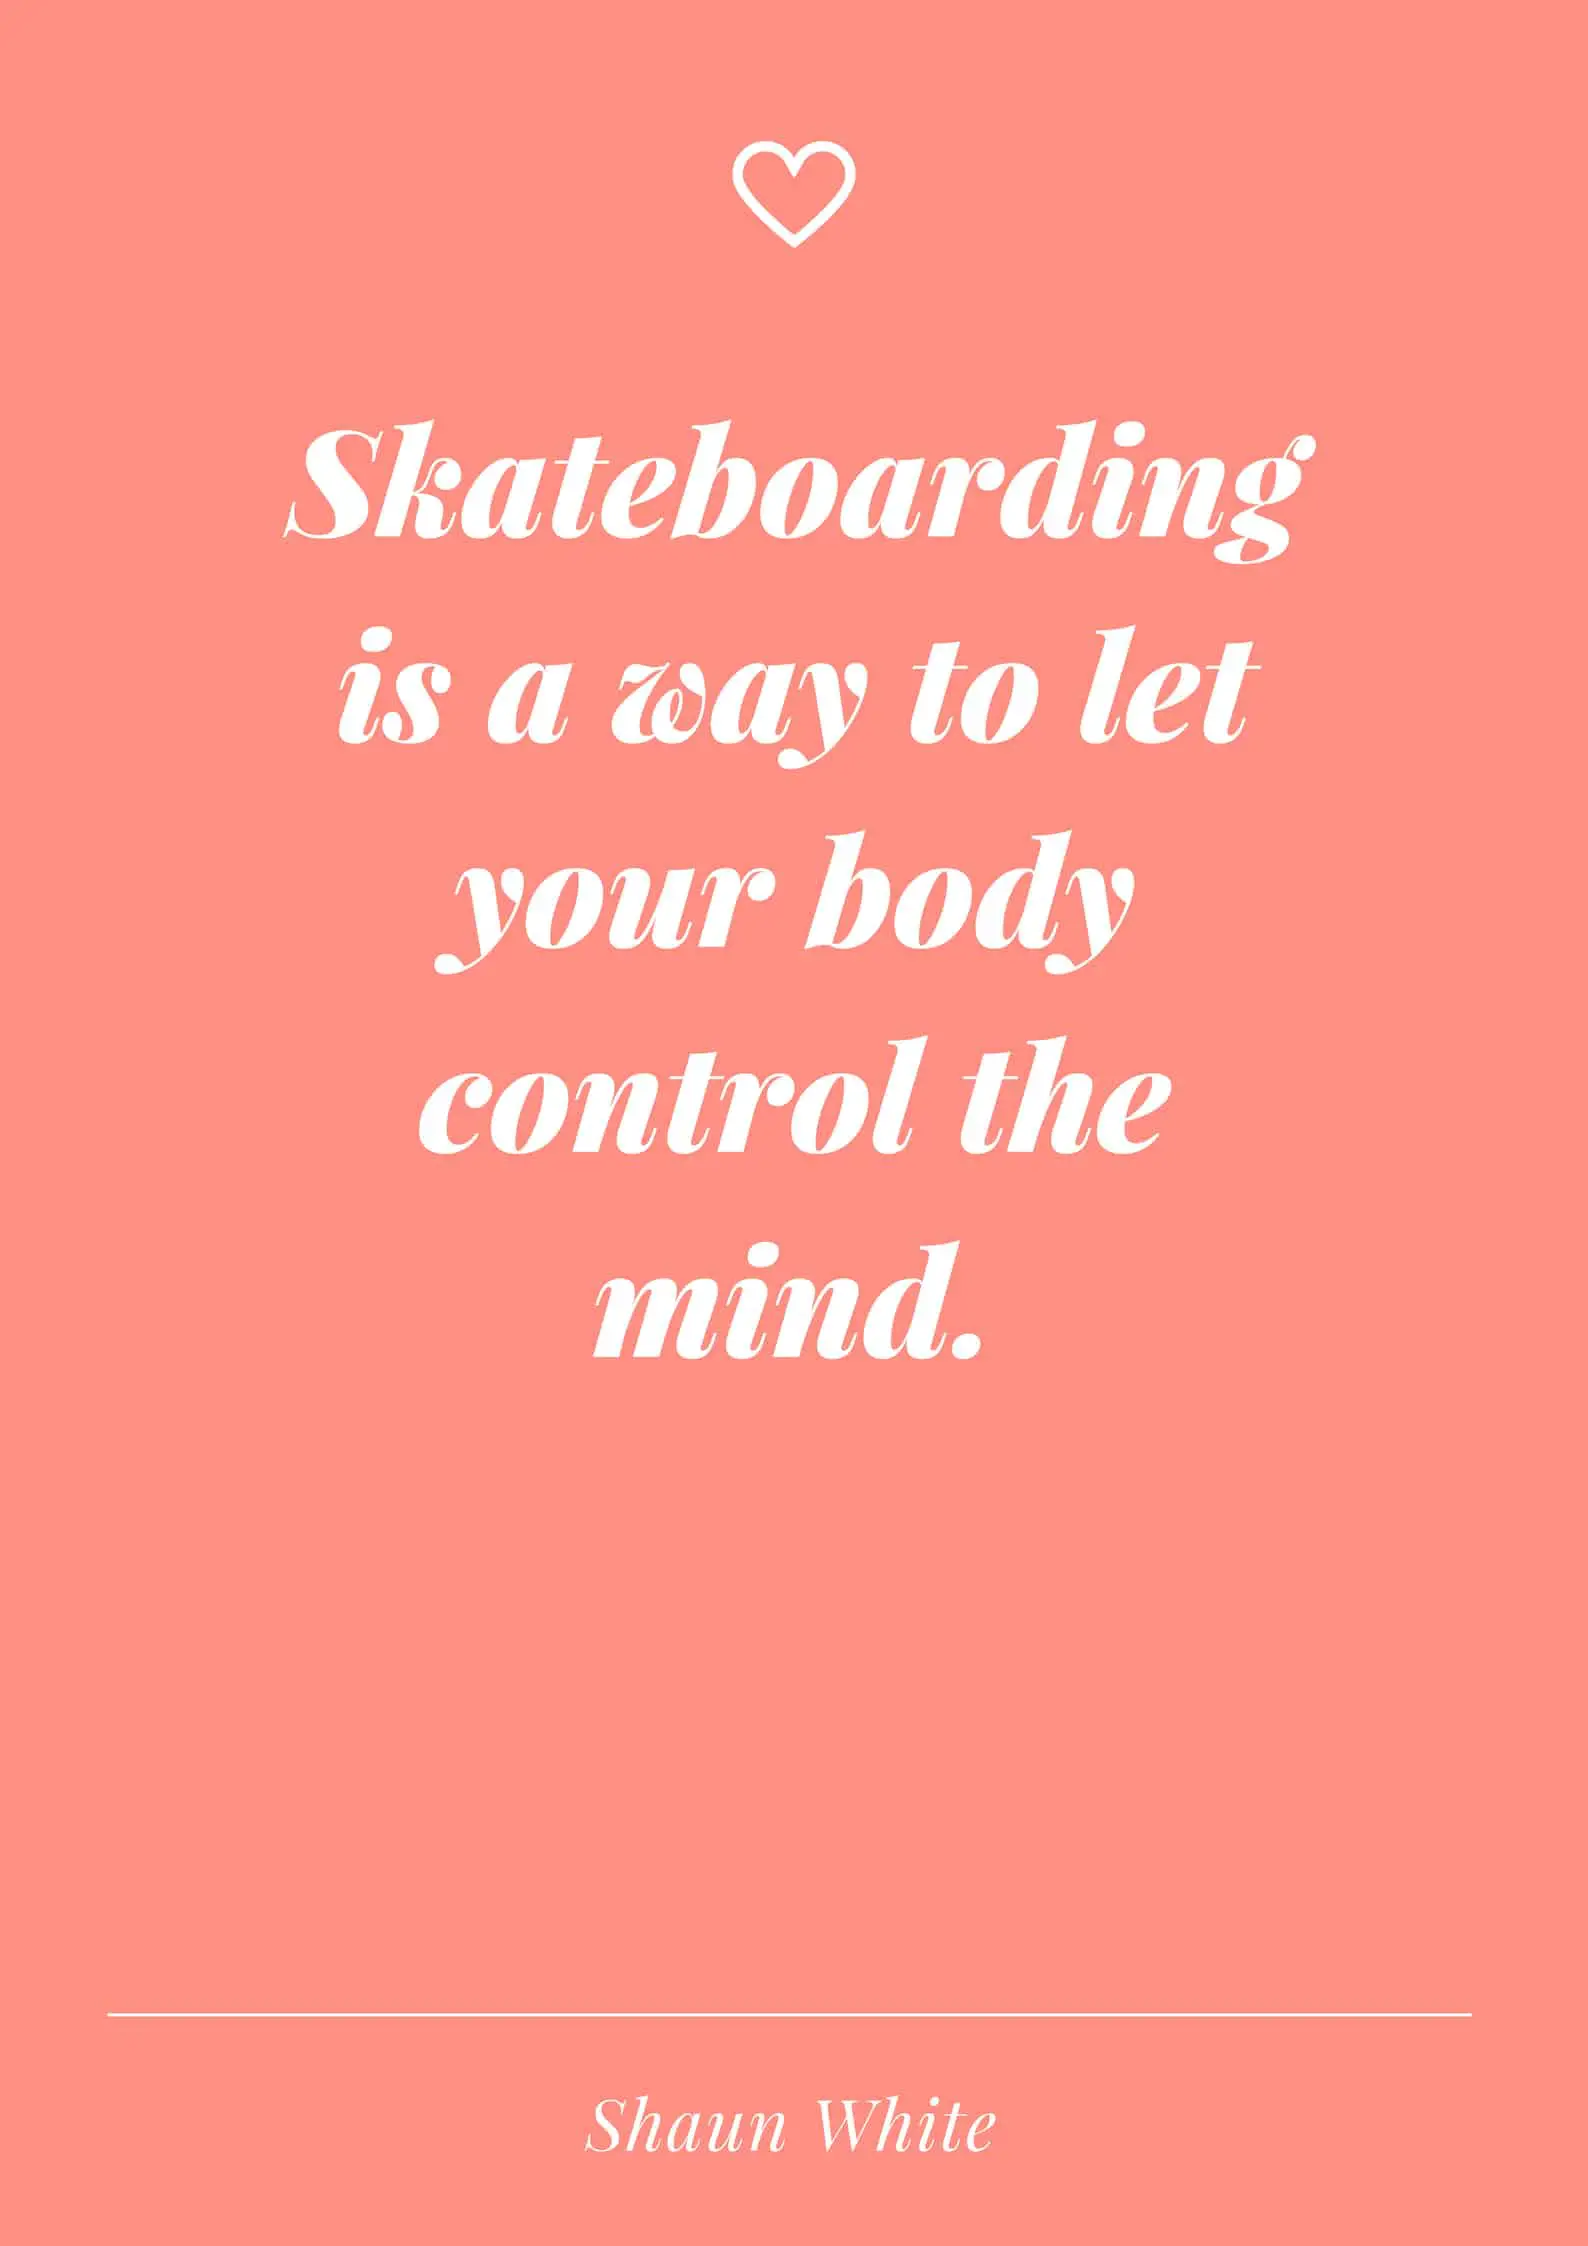 Skateboarding is a way to let your body control the mind.